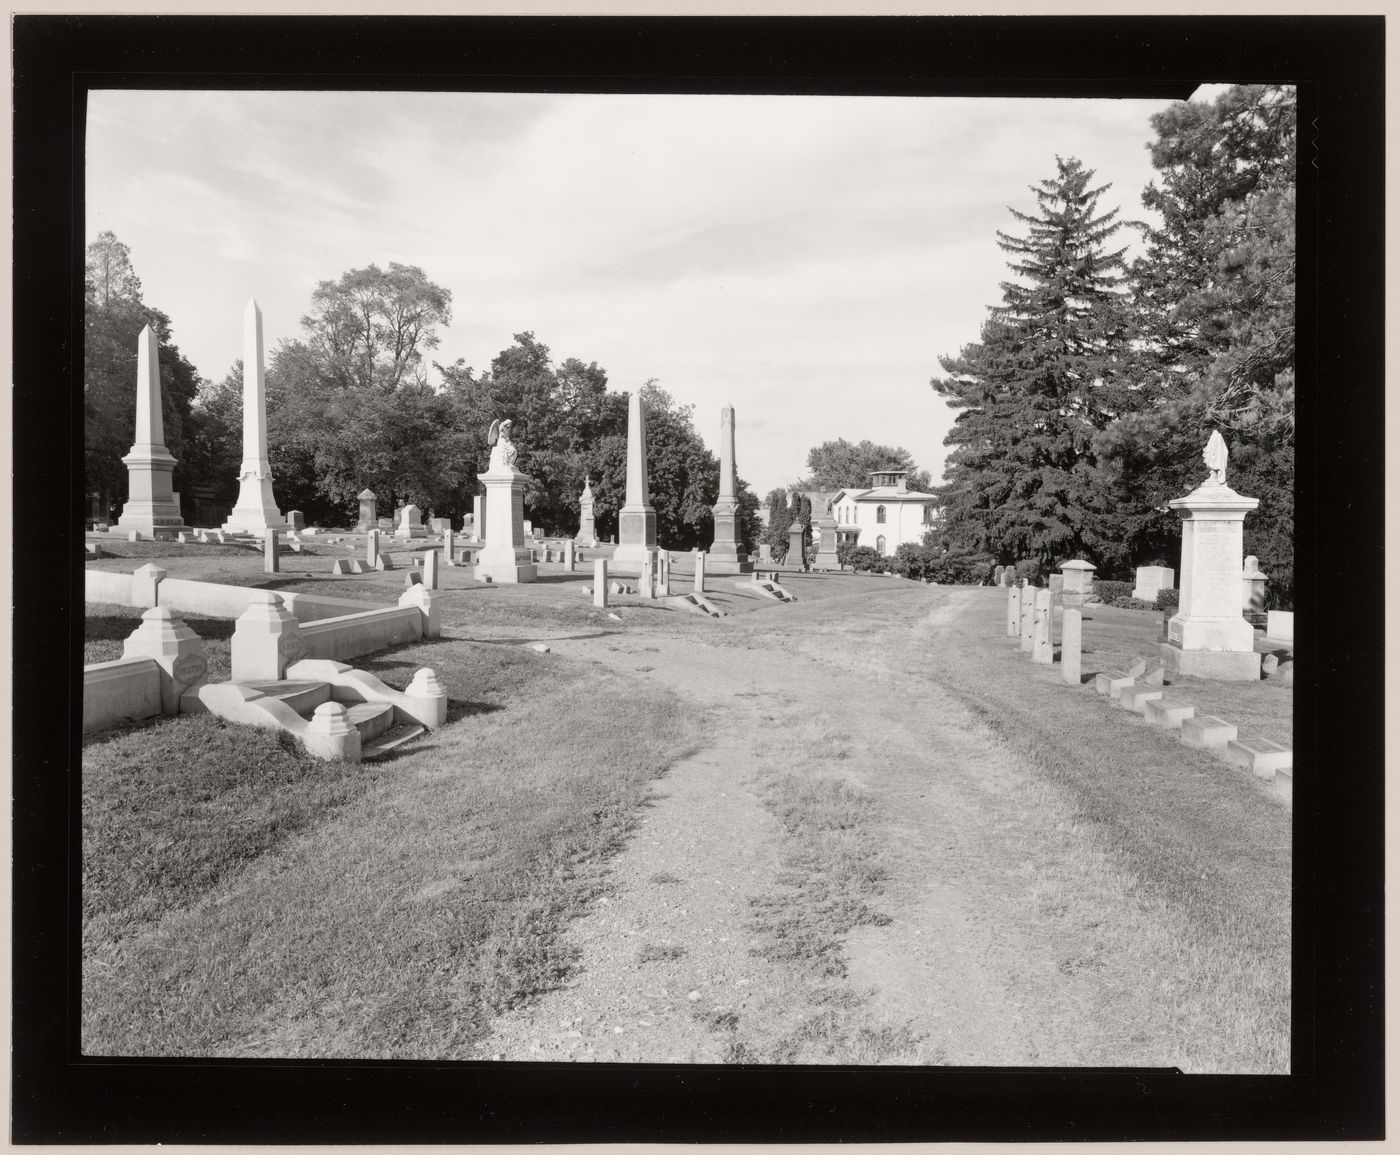 View of pathways and monuments, Hillside Cemetery, Middletown, New York